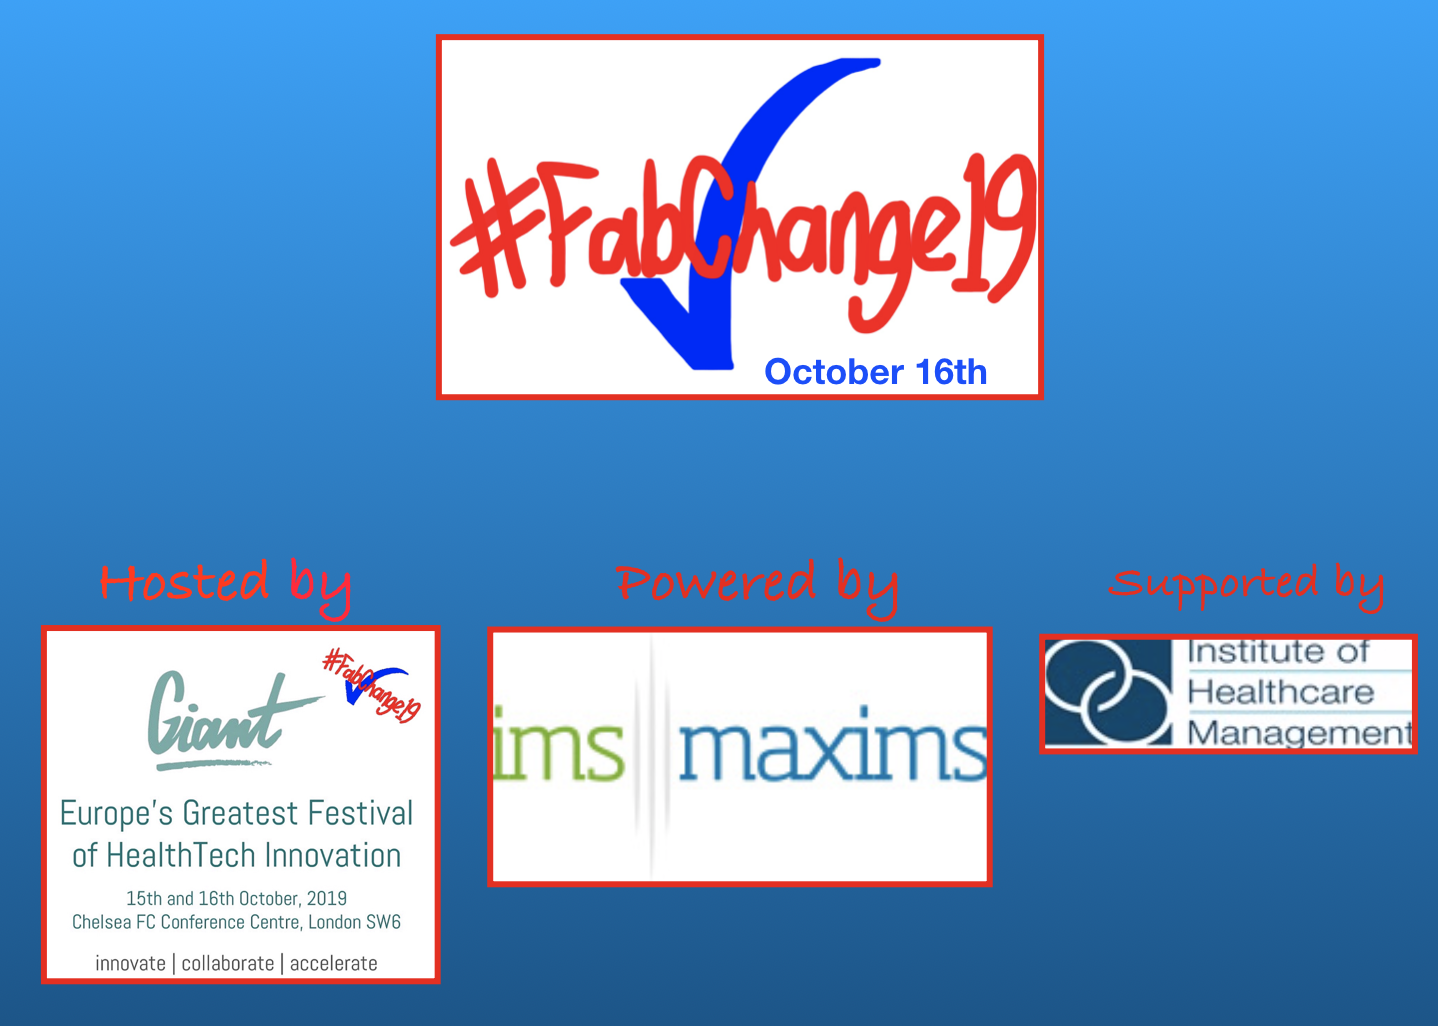 Fab Change 2019 at Addenbrookes Hospital - Women and Children's featured image